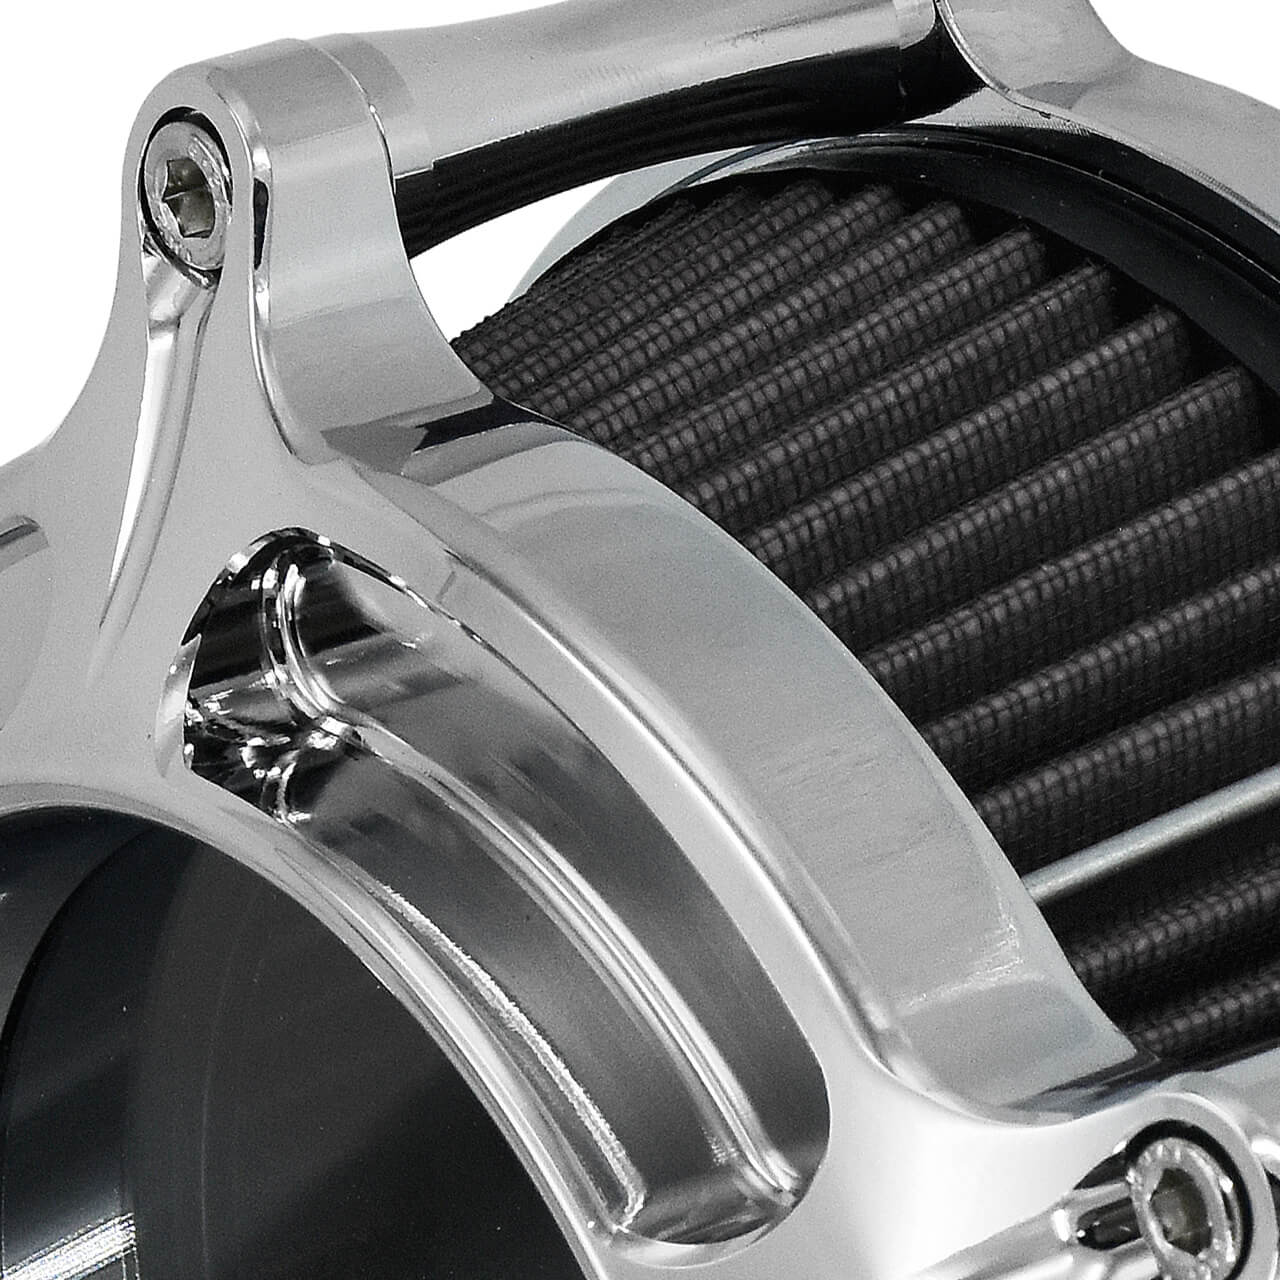 AF0067-mactions-air-filter-for-harley-m8-softail